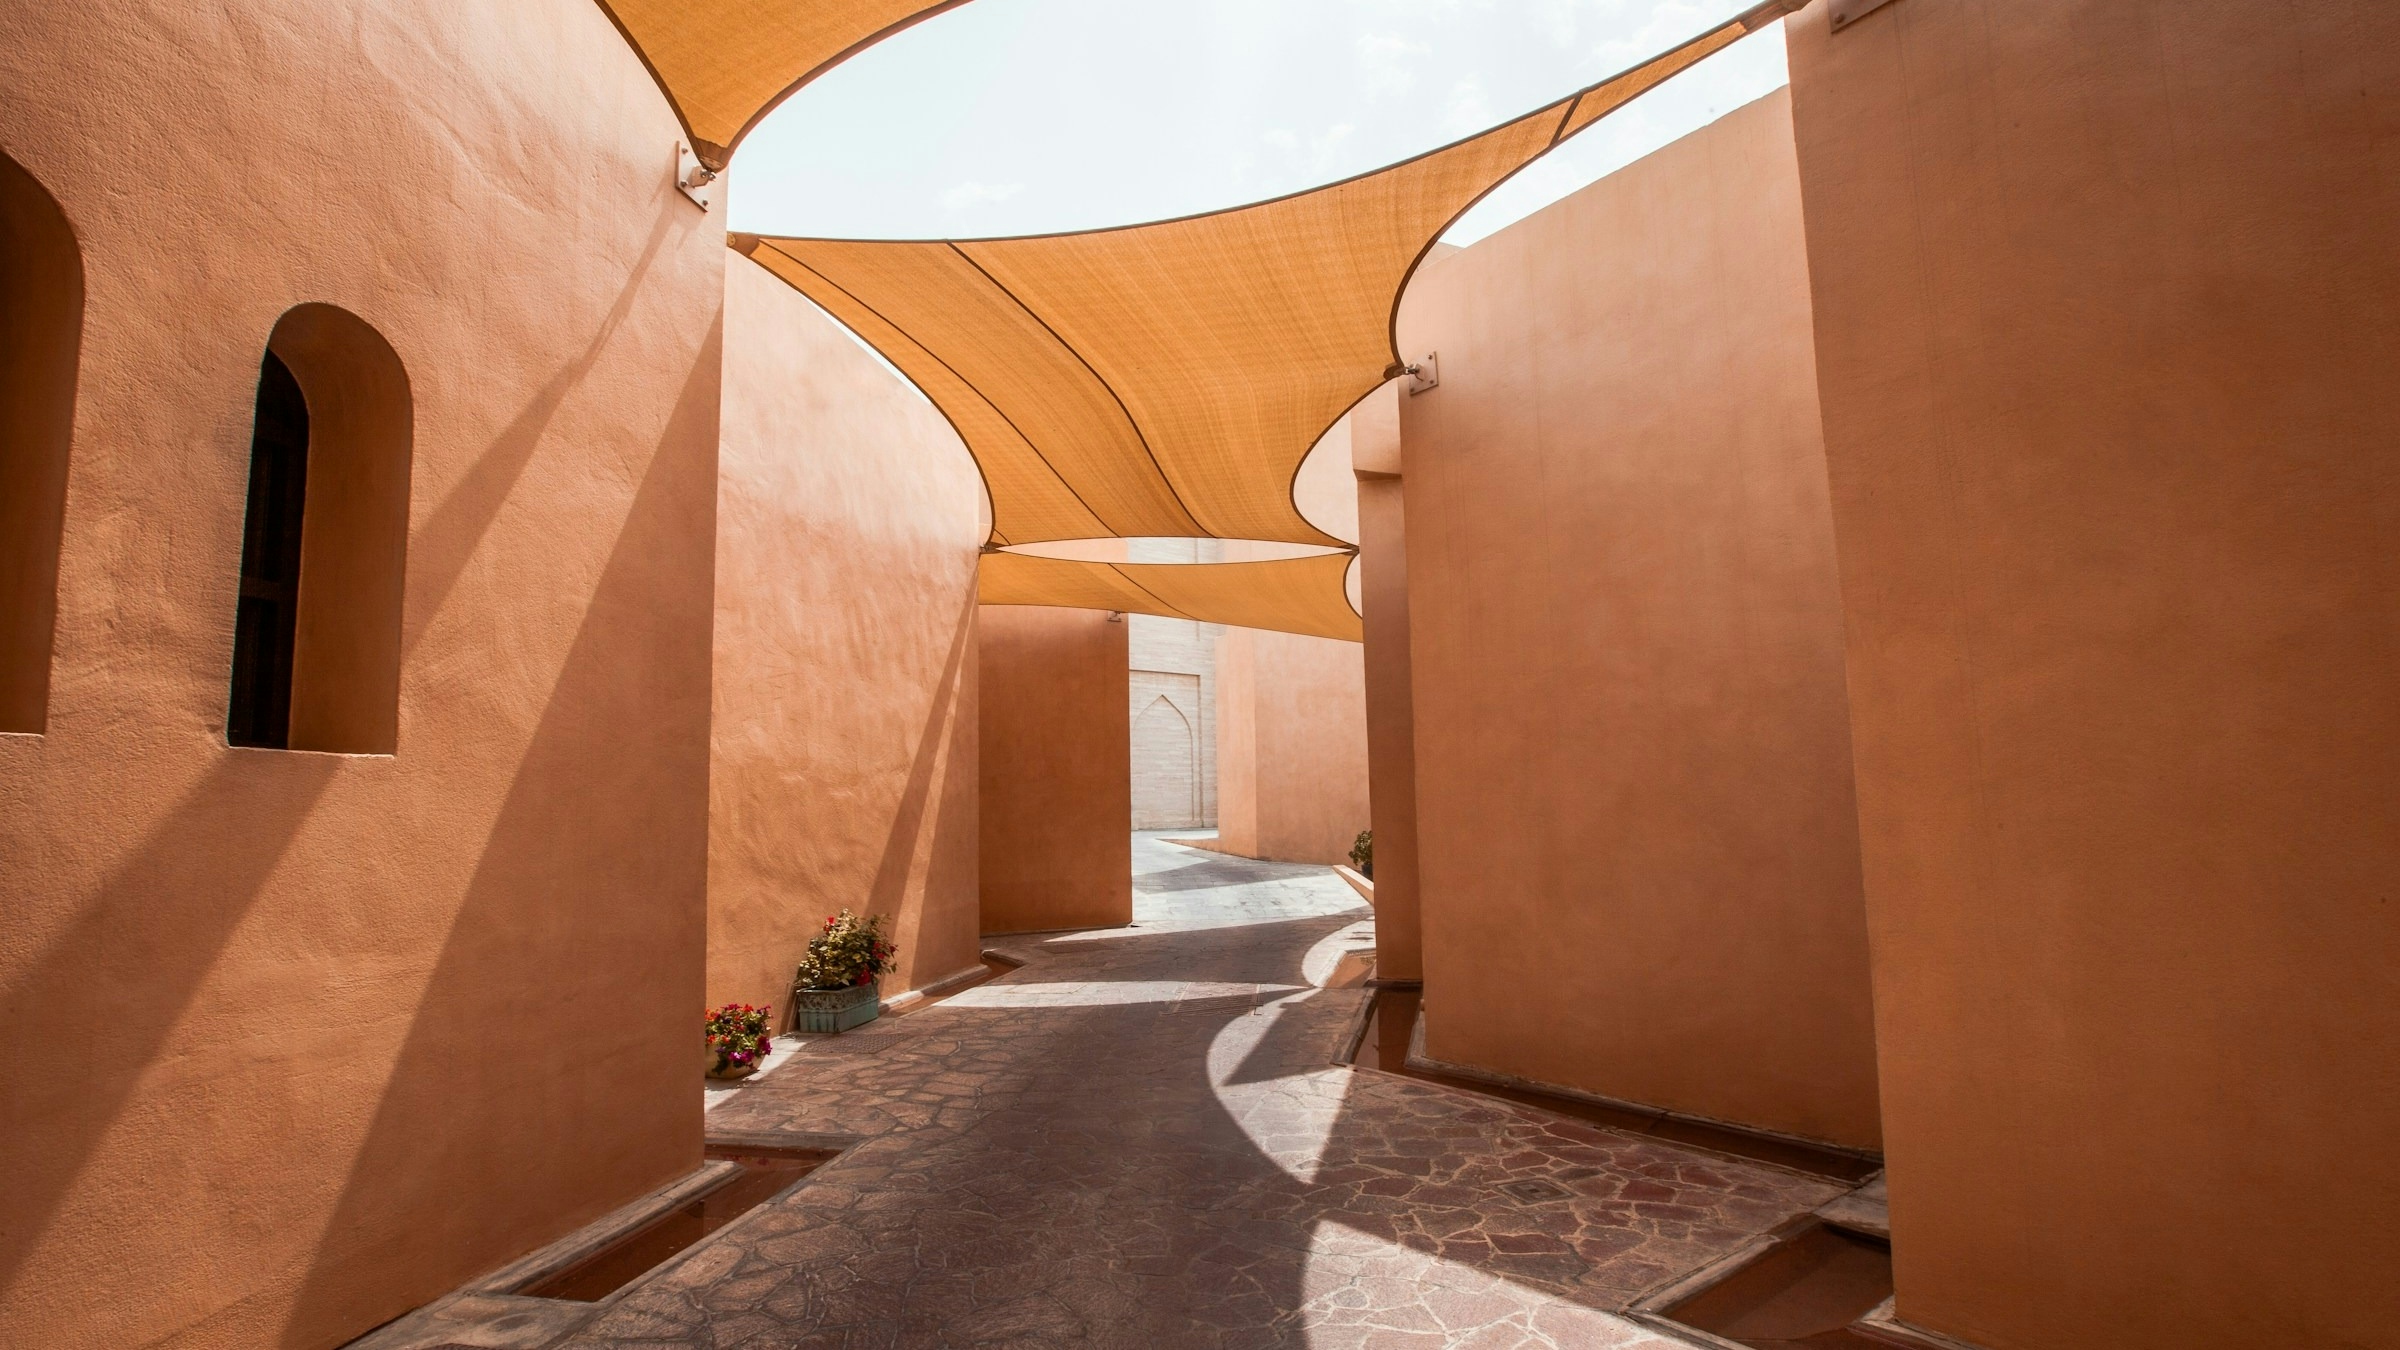 An alleyway in Qatar with clay walls and shade coverings overhead.